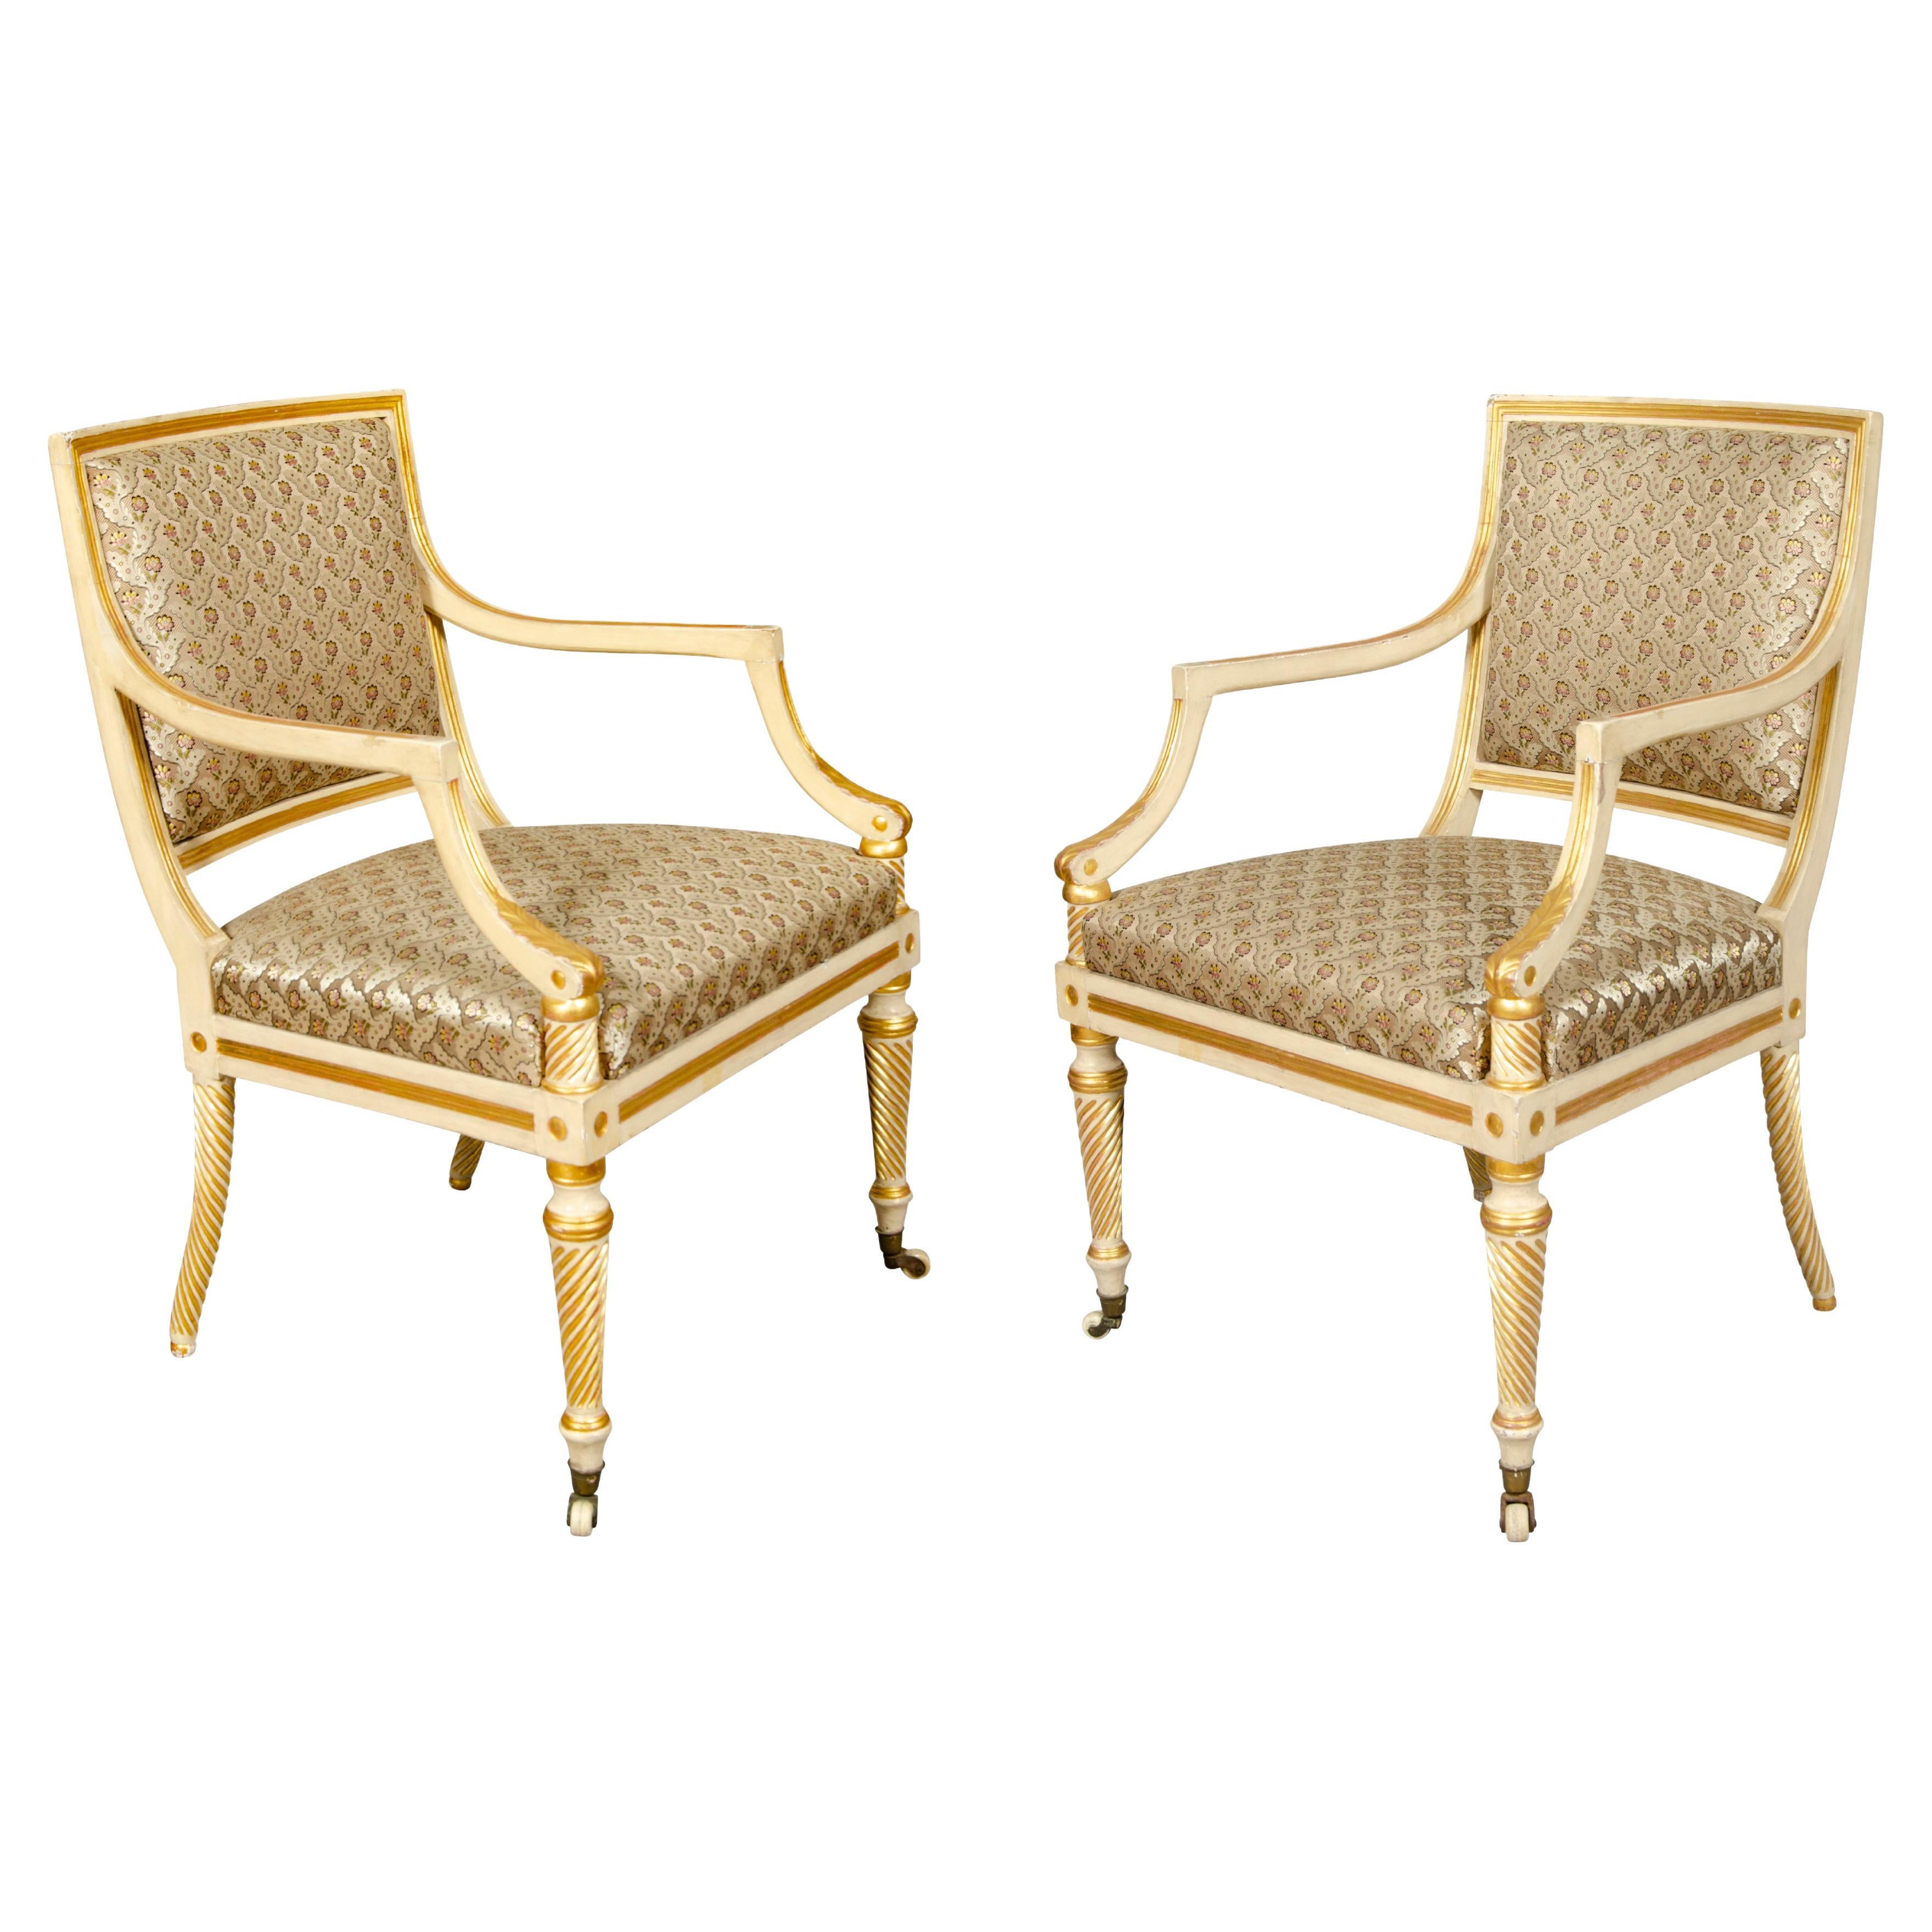 Pair of Regency Painted and Gilded Armchairs